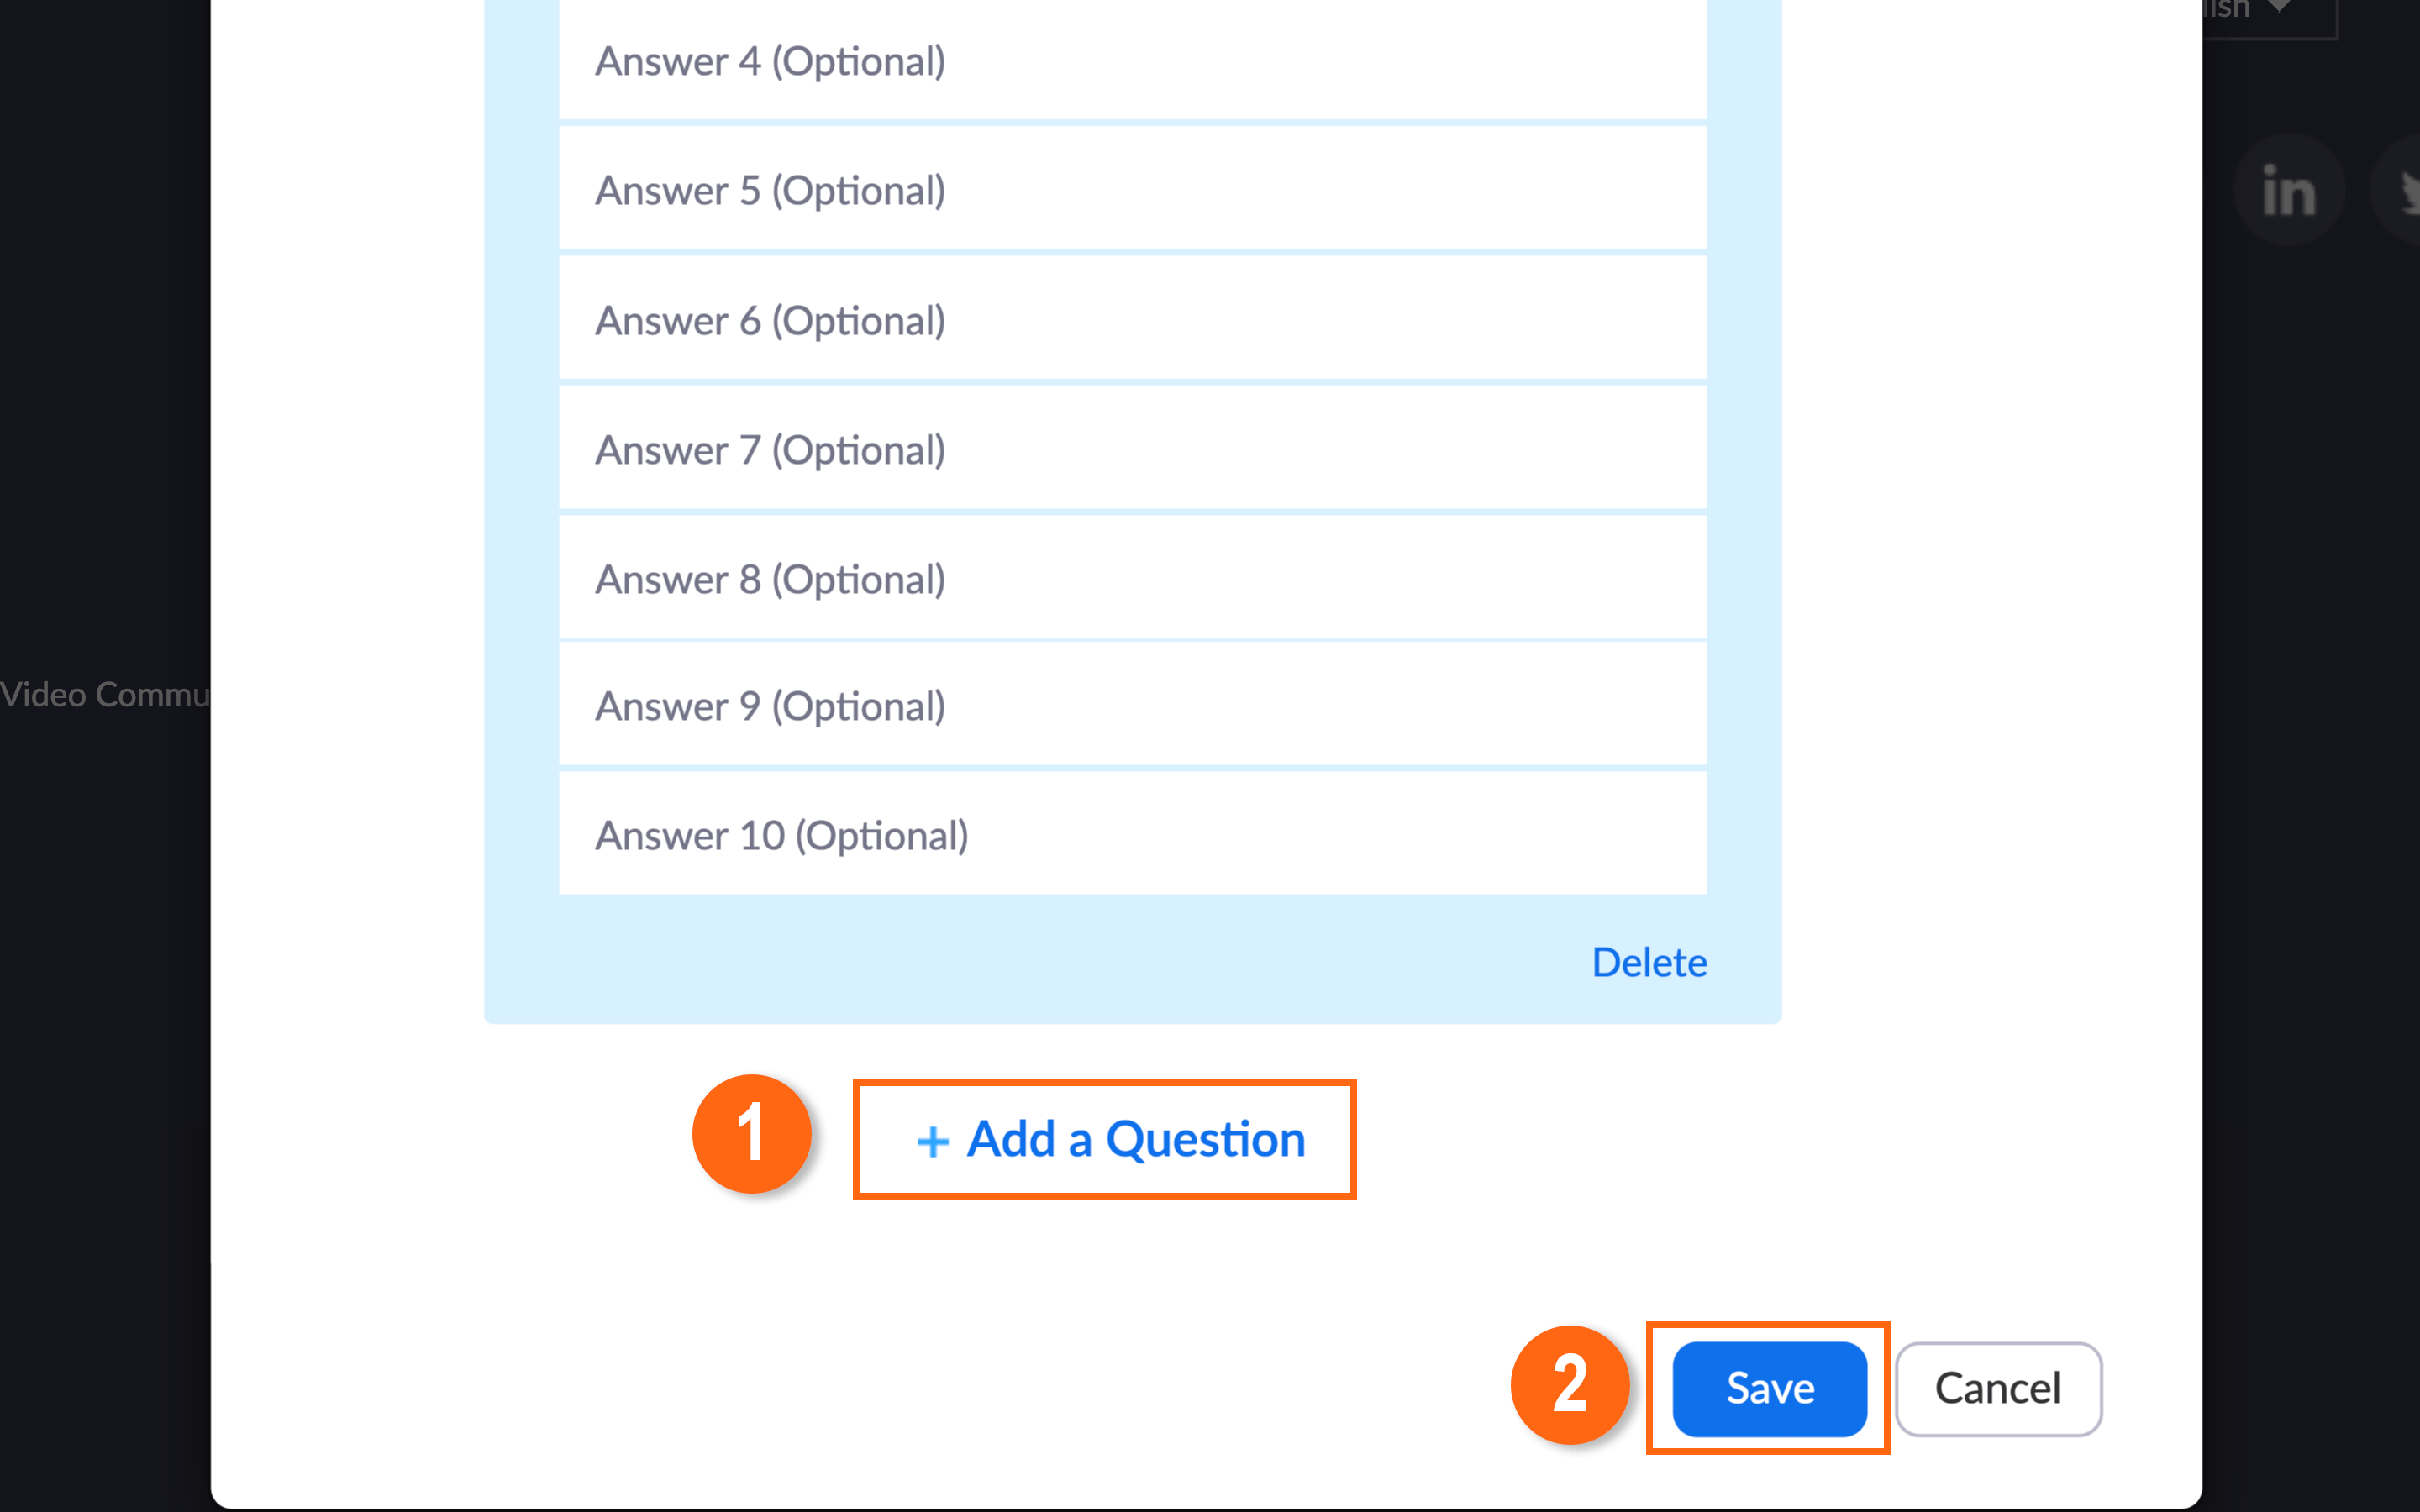 Adding additional questions to the same poll 